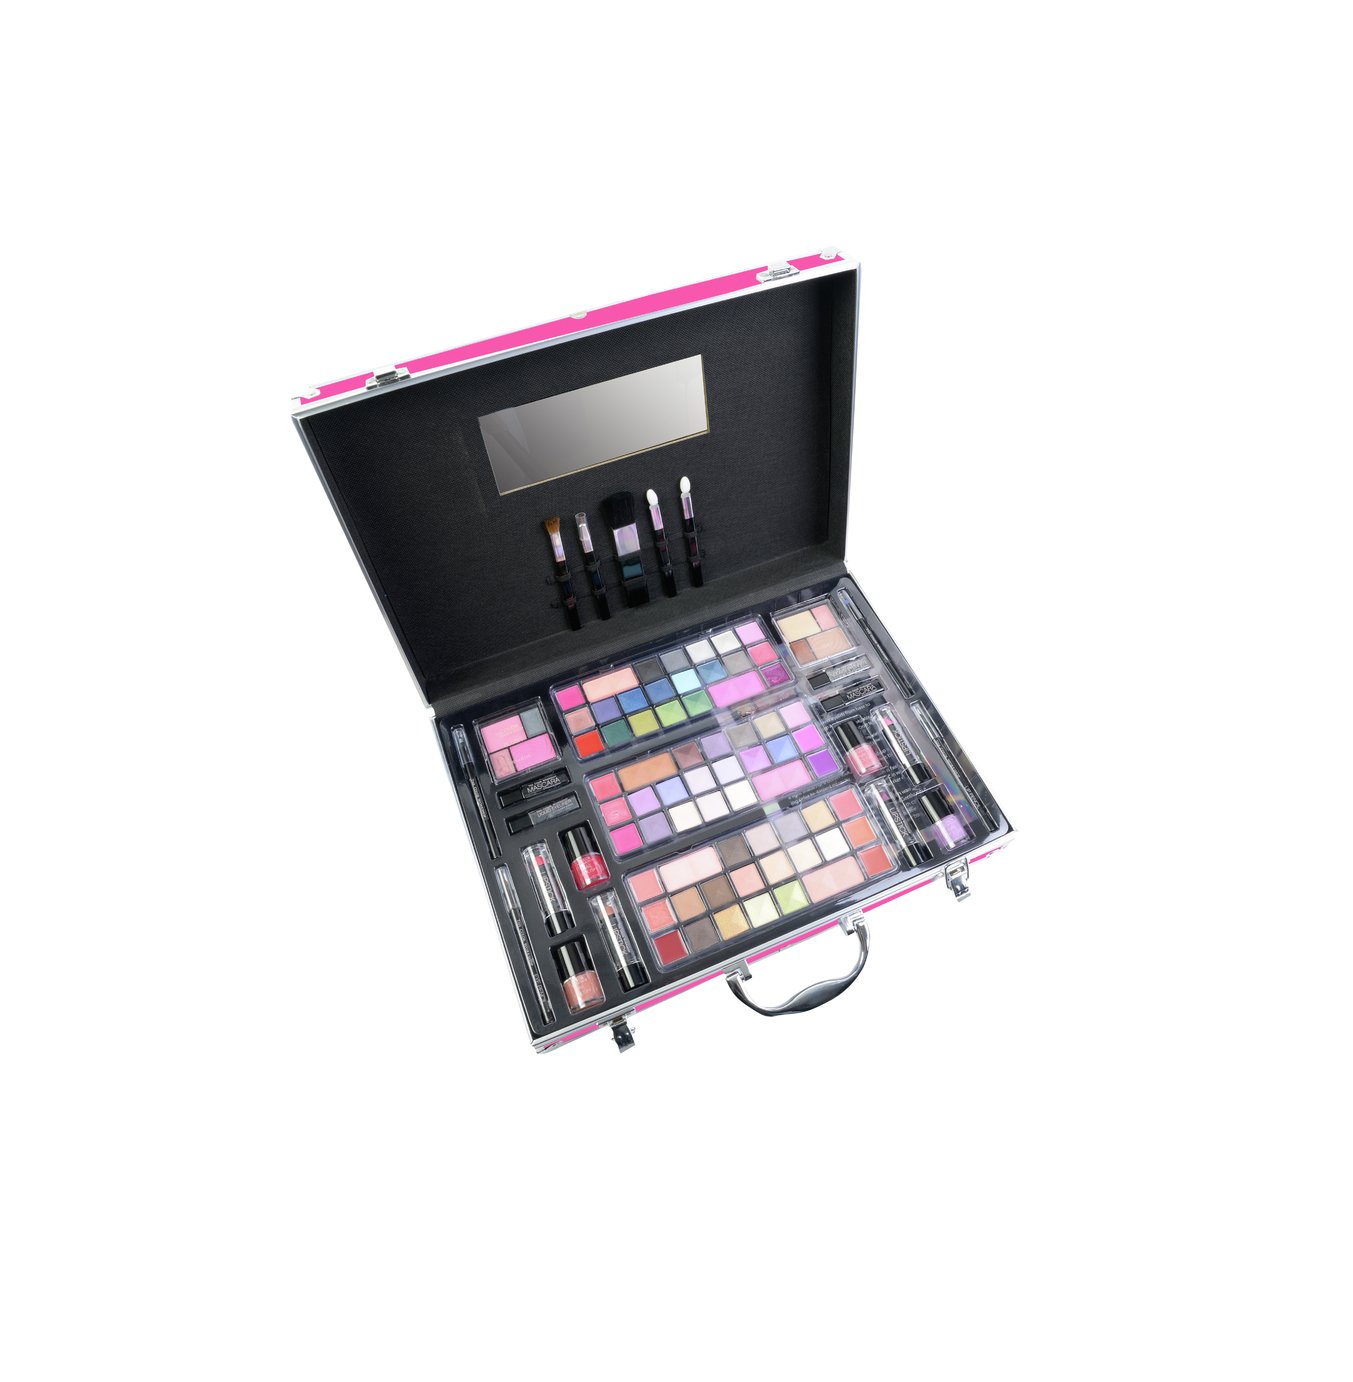 The Color Workshop Pink Cosmetic Beauty Collection